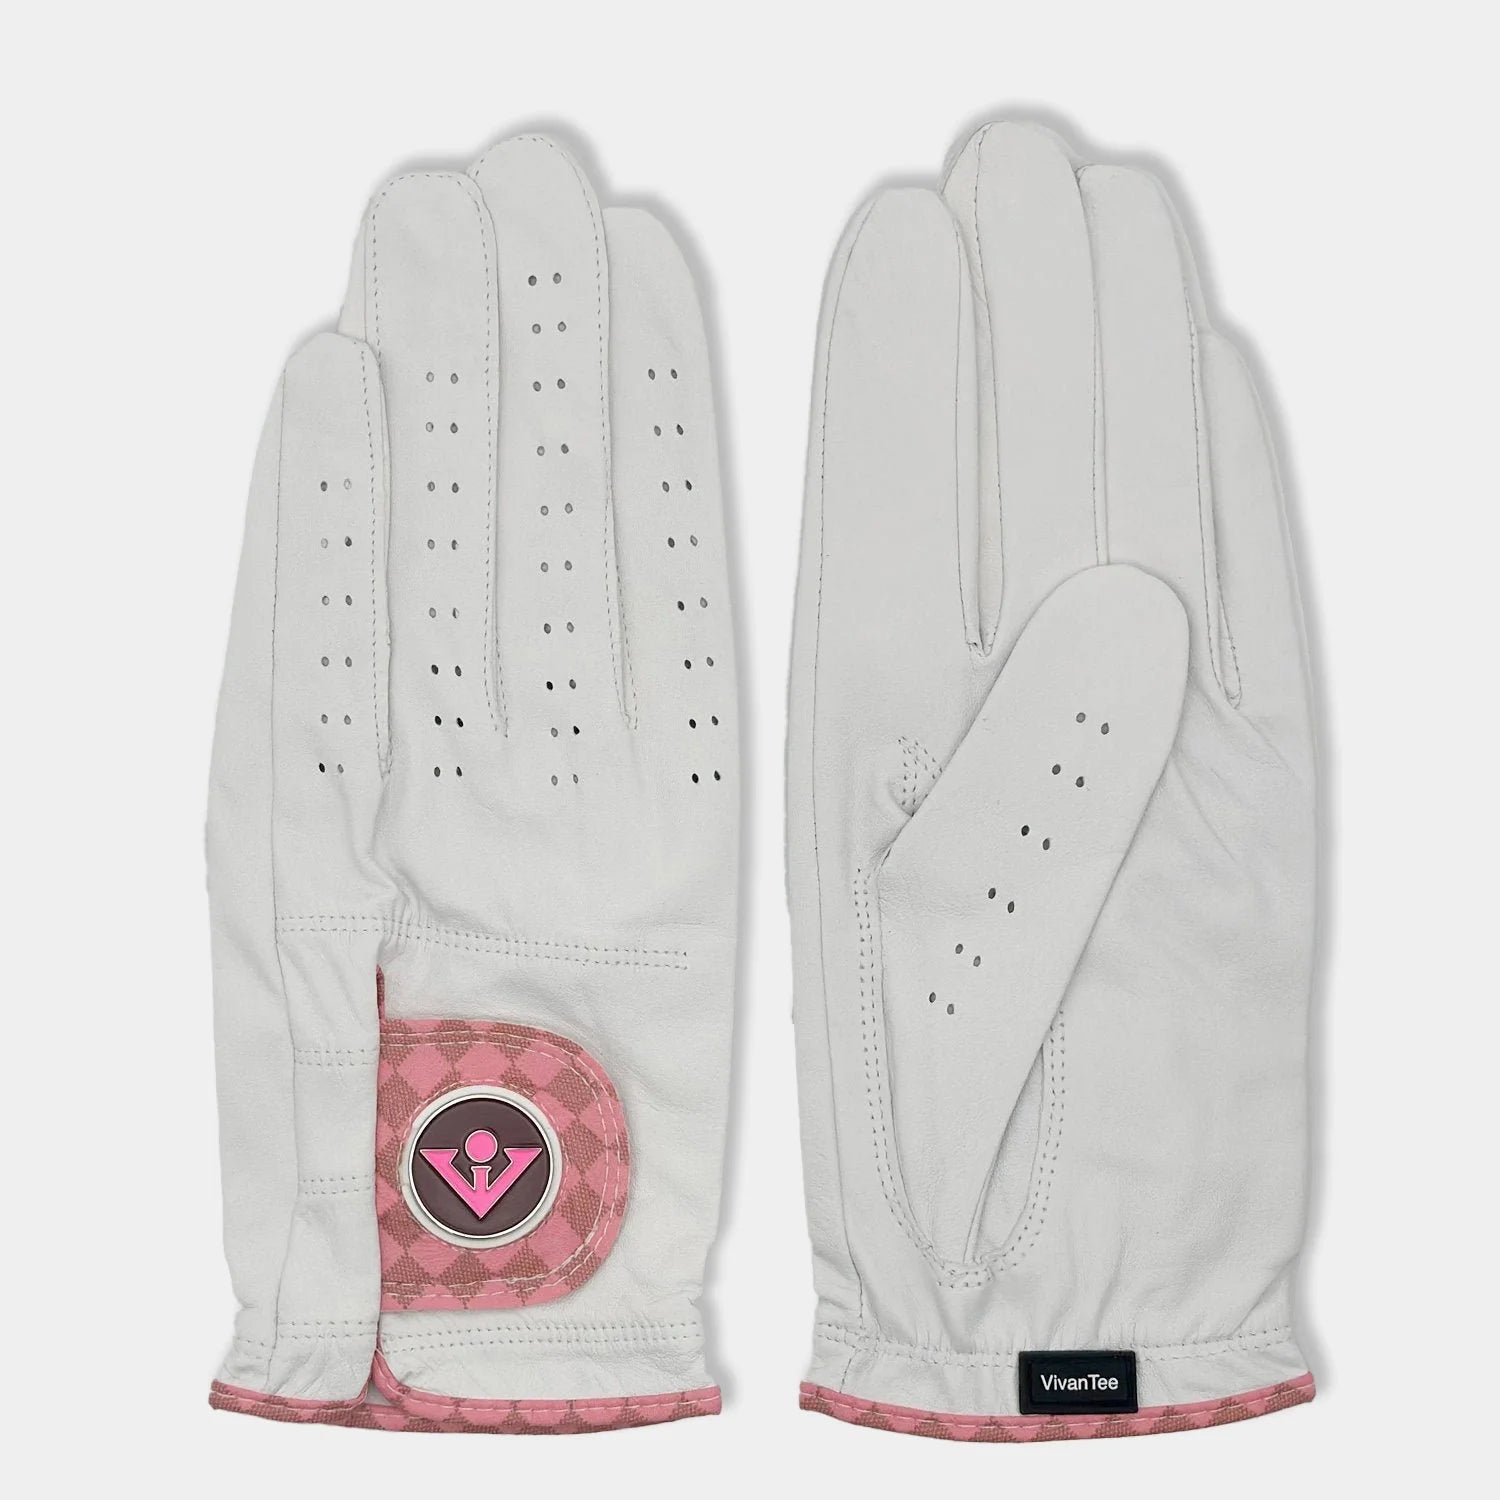 White and blush pink designer golf glove with a black backdrop to show case the unique colors and patterns.